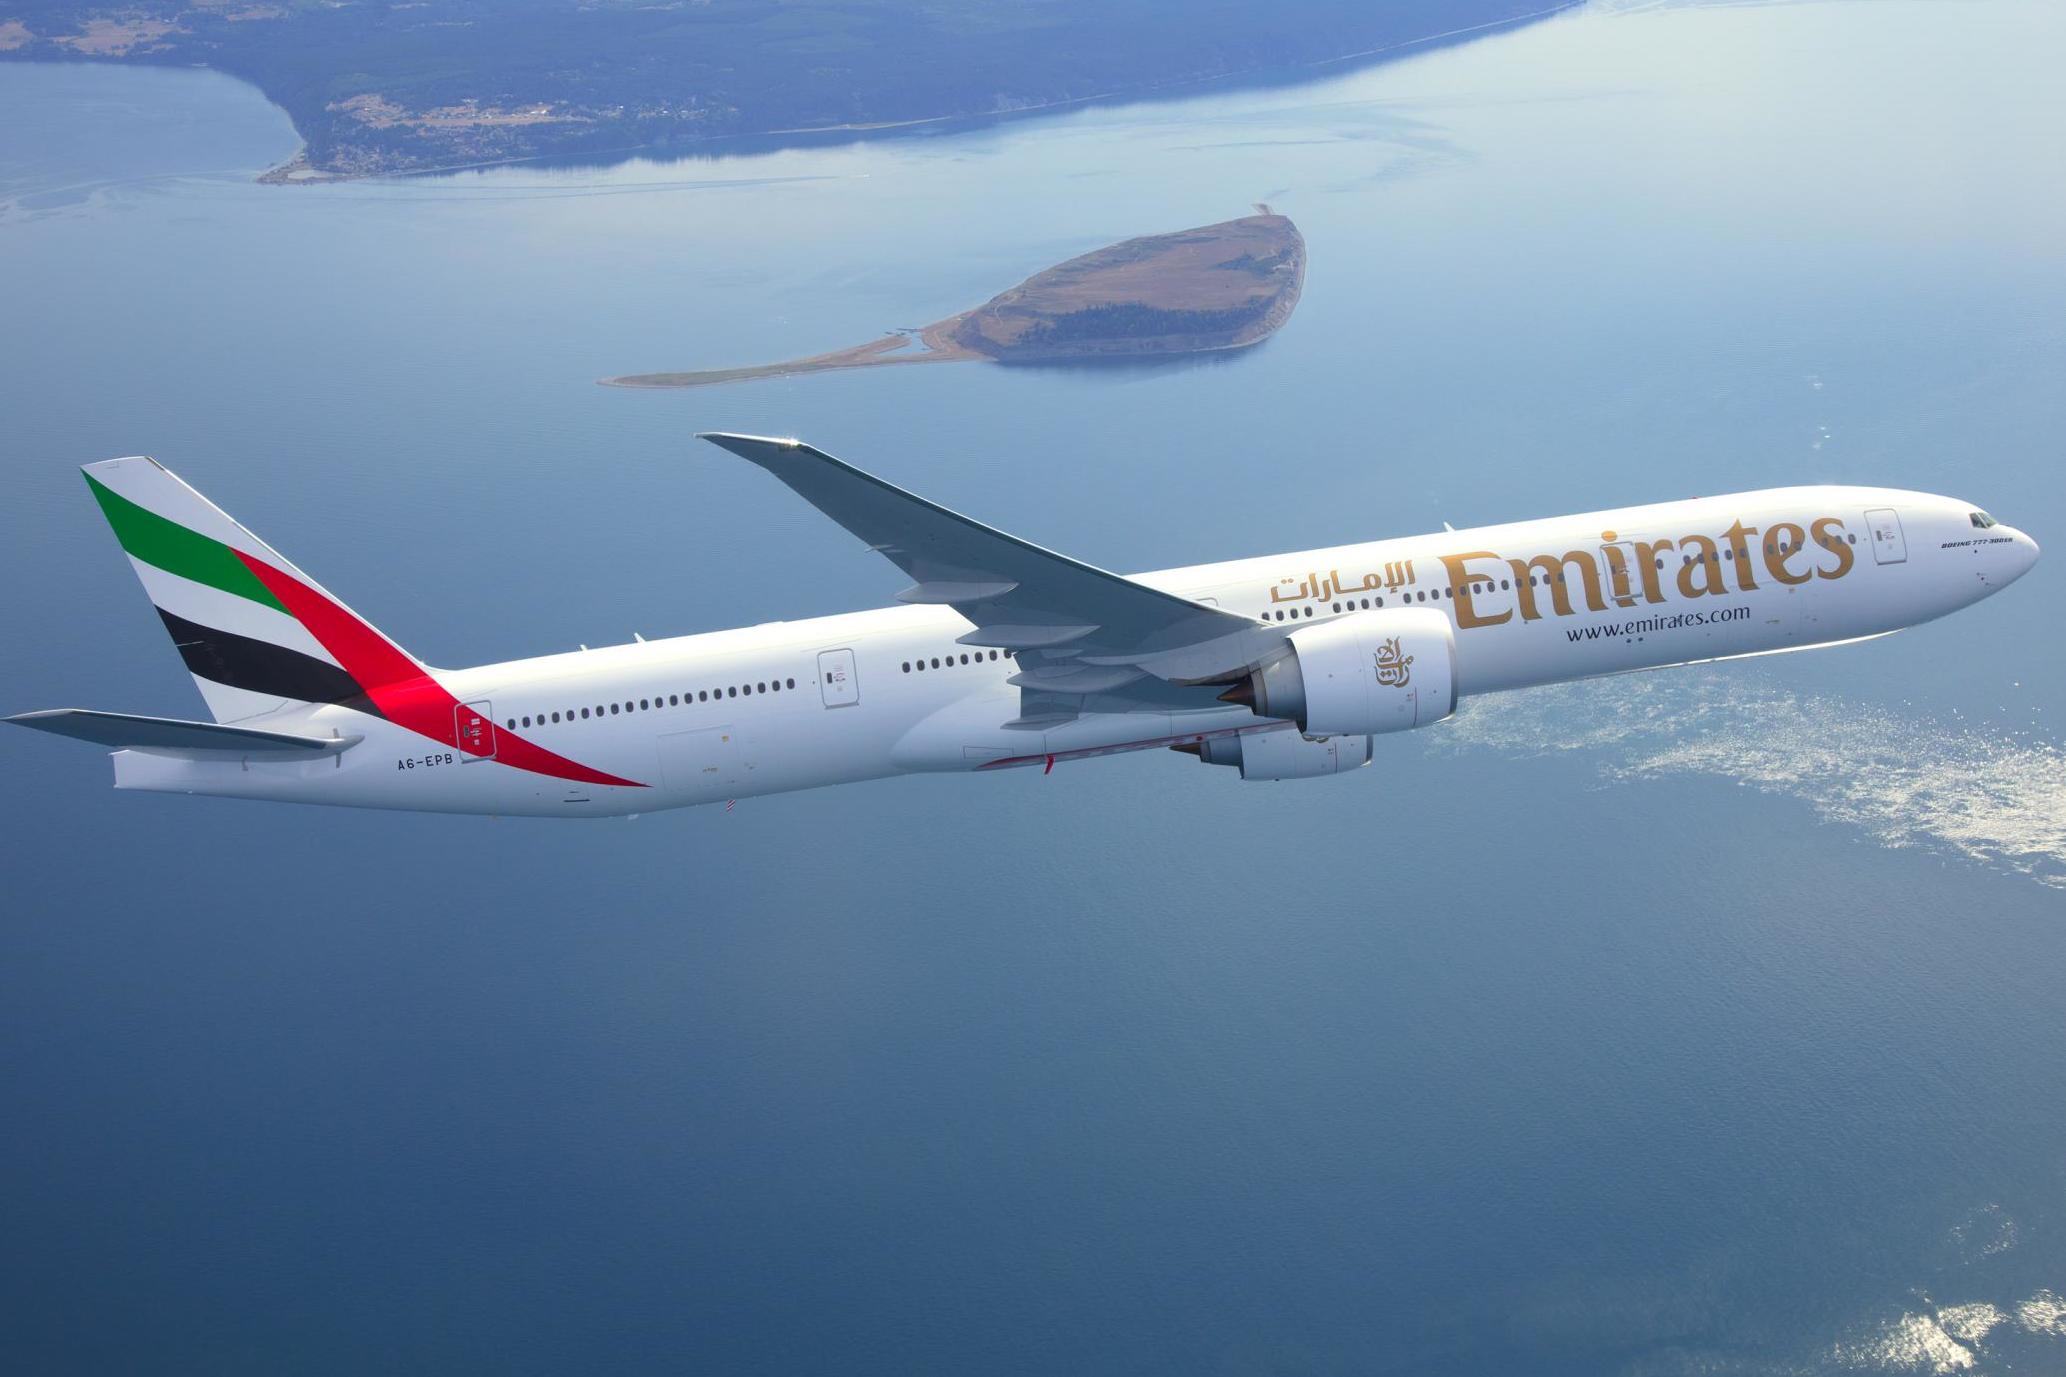 Cover up: Emirates will pay up to £135,000 in medical and repatriation costs